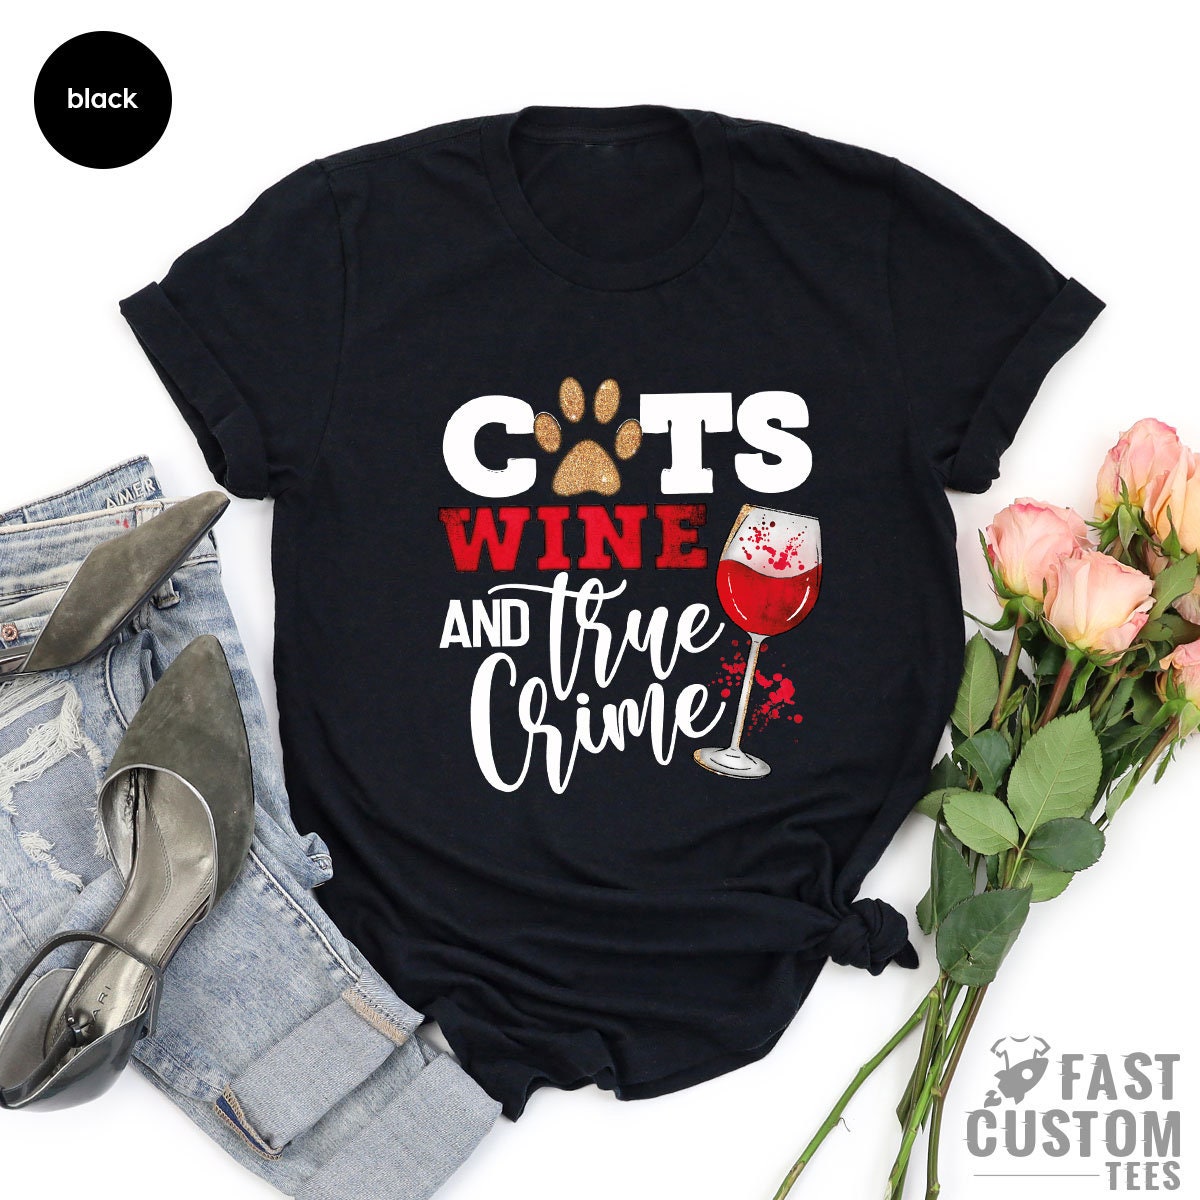 Cats Wine And True Crime Shirt, Funny Cat Lover Shirt, Cat Owner T-Shirt, Gift For Cat Mom, Wine Lover TShirt, Sarcastic Shirt, Crime Tee - Fastdeliverytees.com